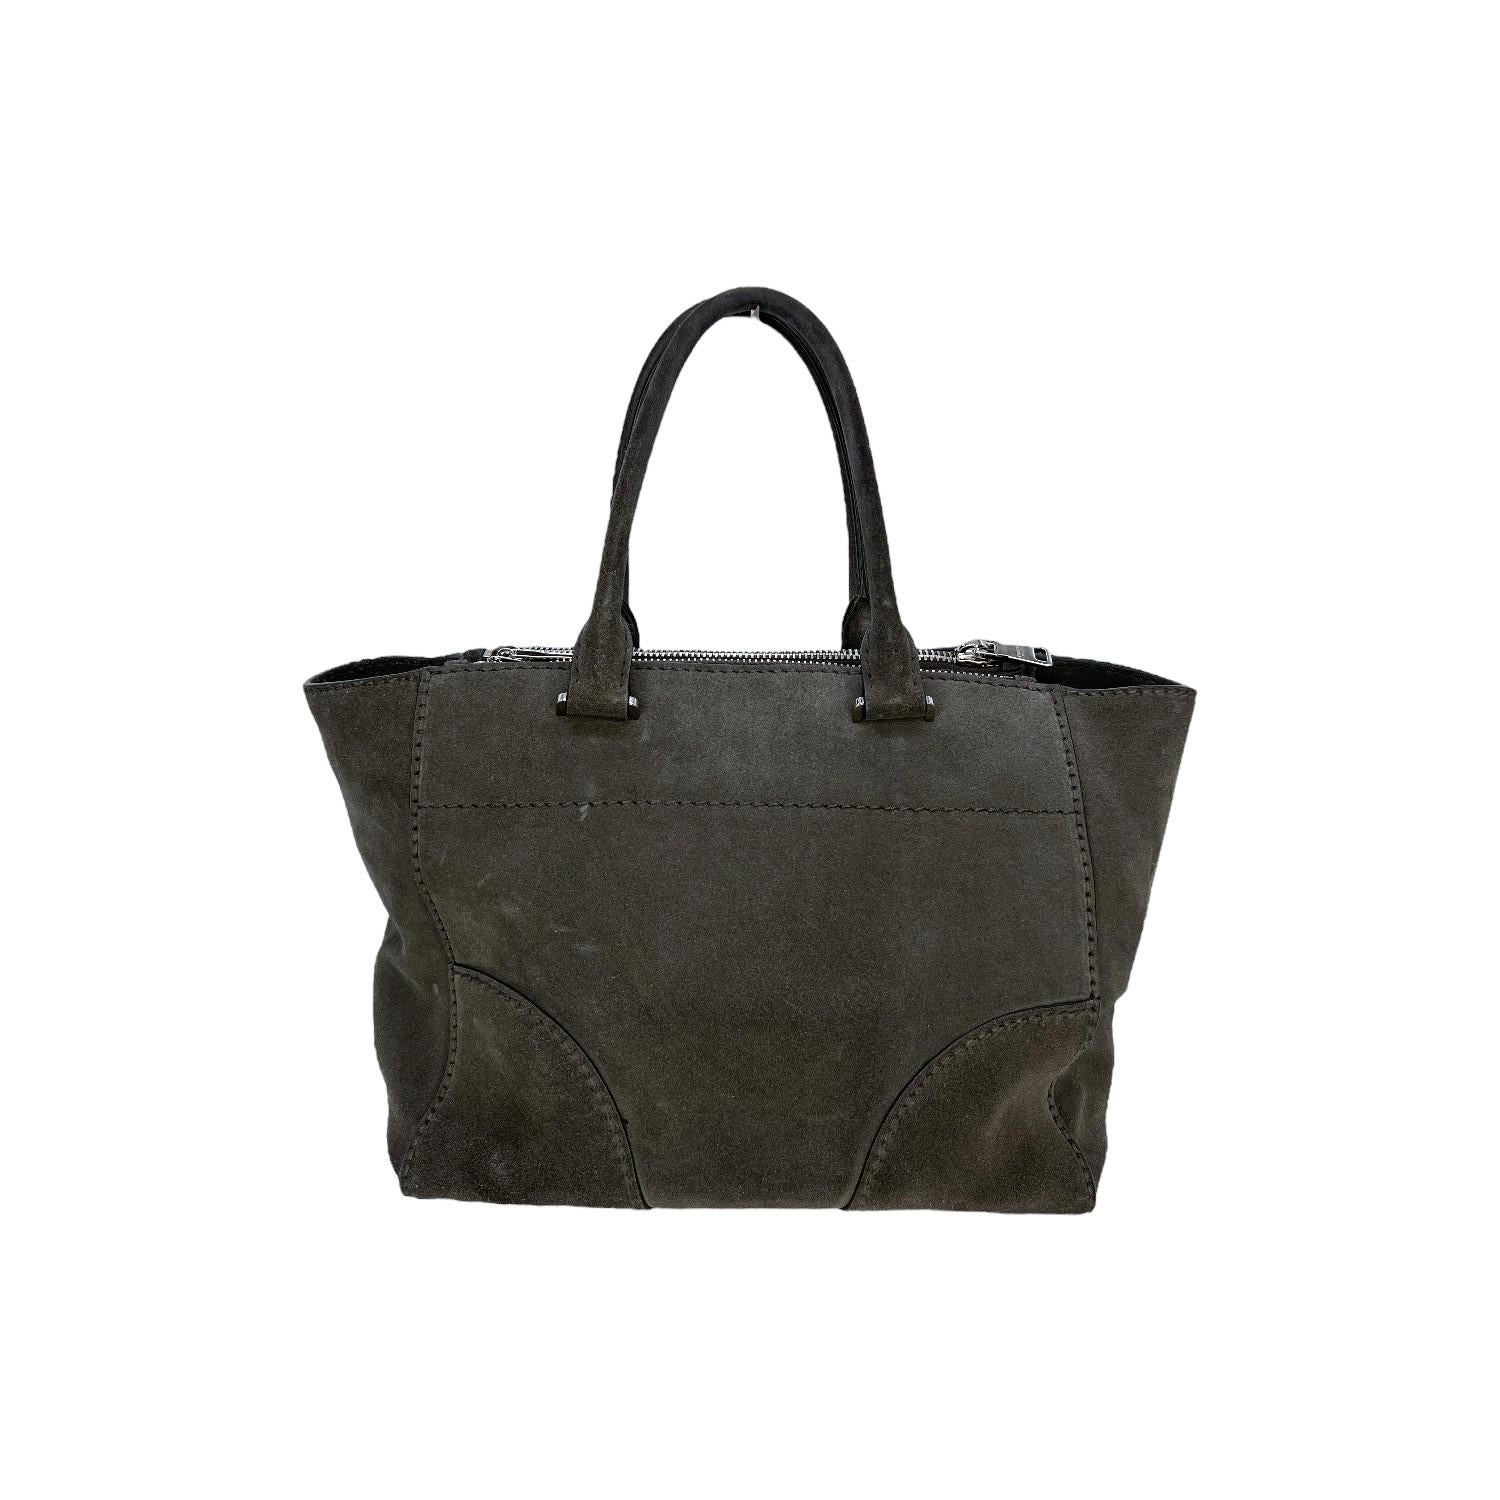 This Prada Twin Pocket Tote is finely crafted of a grey suede exterior with leather trimming and silver-tone hardware features. It has dual rolled top handles. It features twin zipper pockets on the front and backside that also includes a magnetic